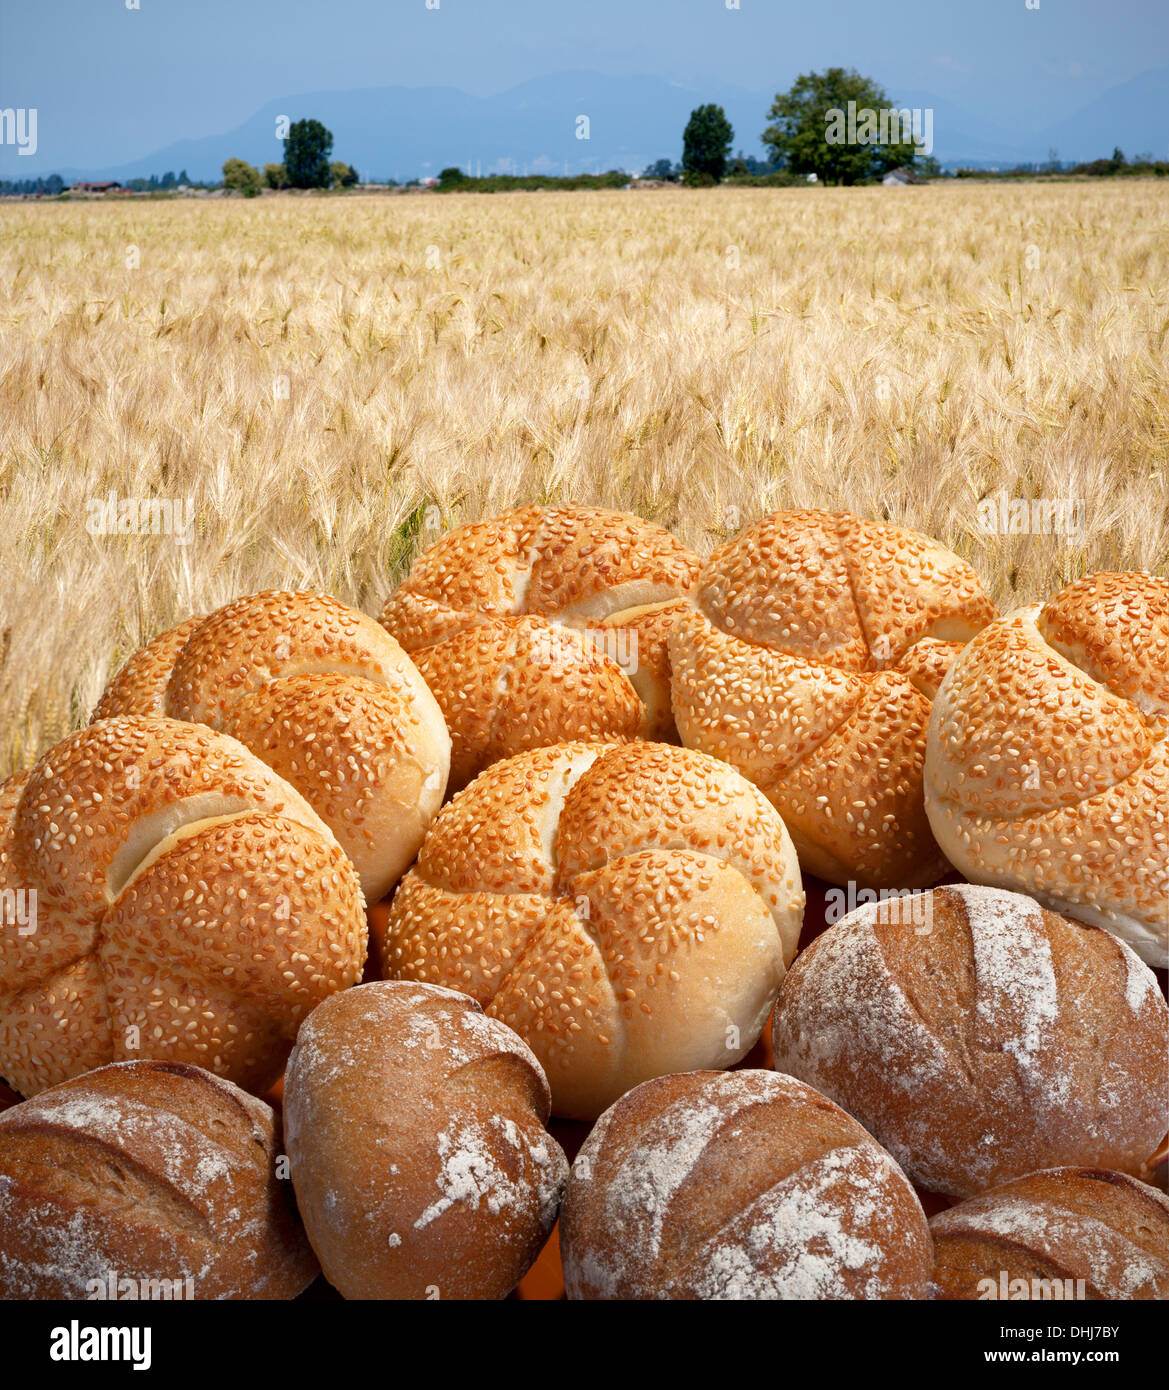 Buns and baguettes, bakery with a field as background Stock Photo